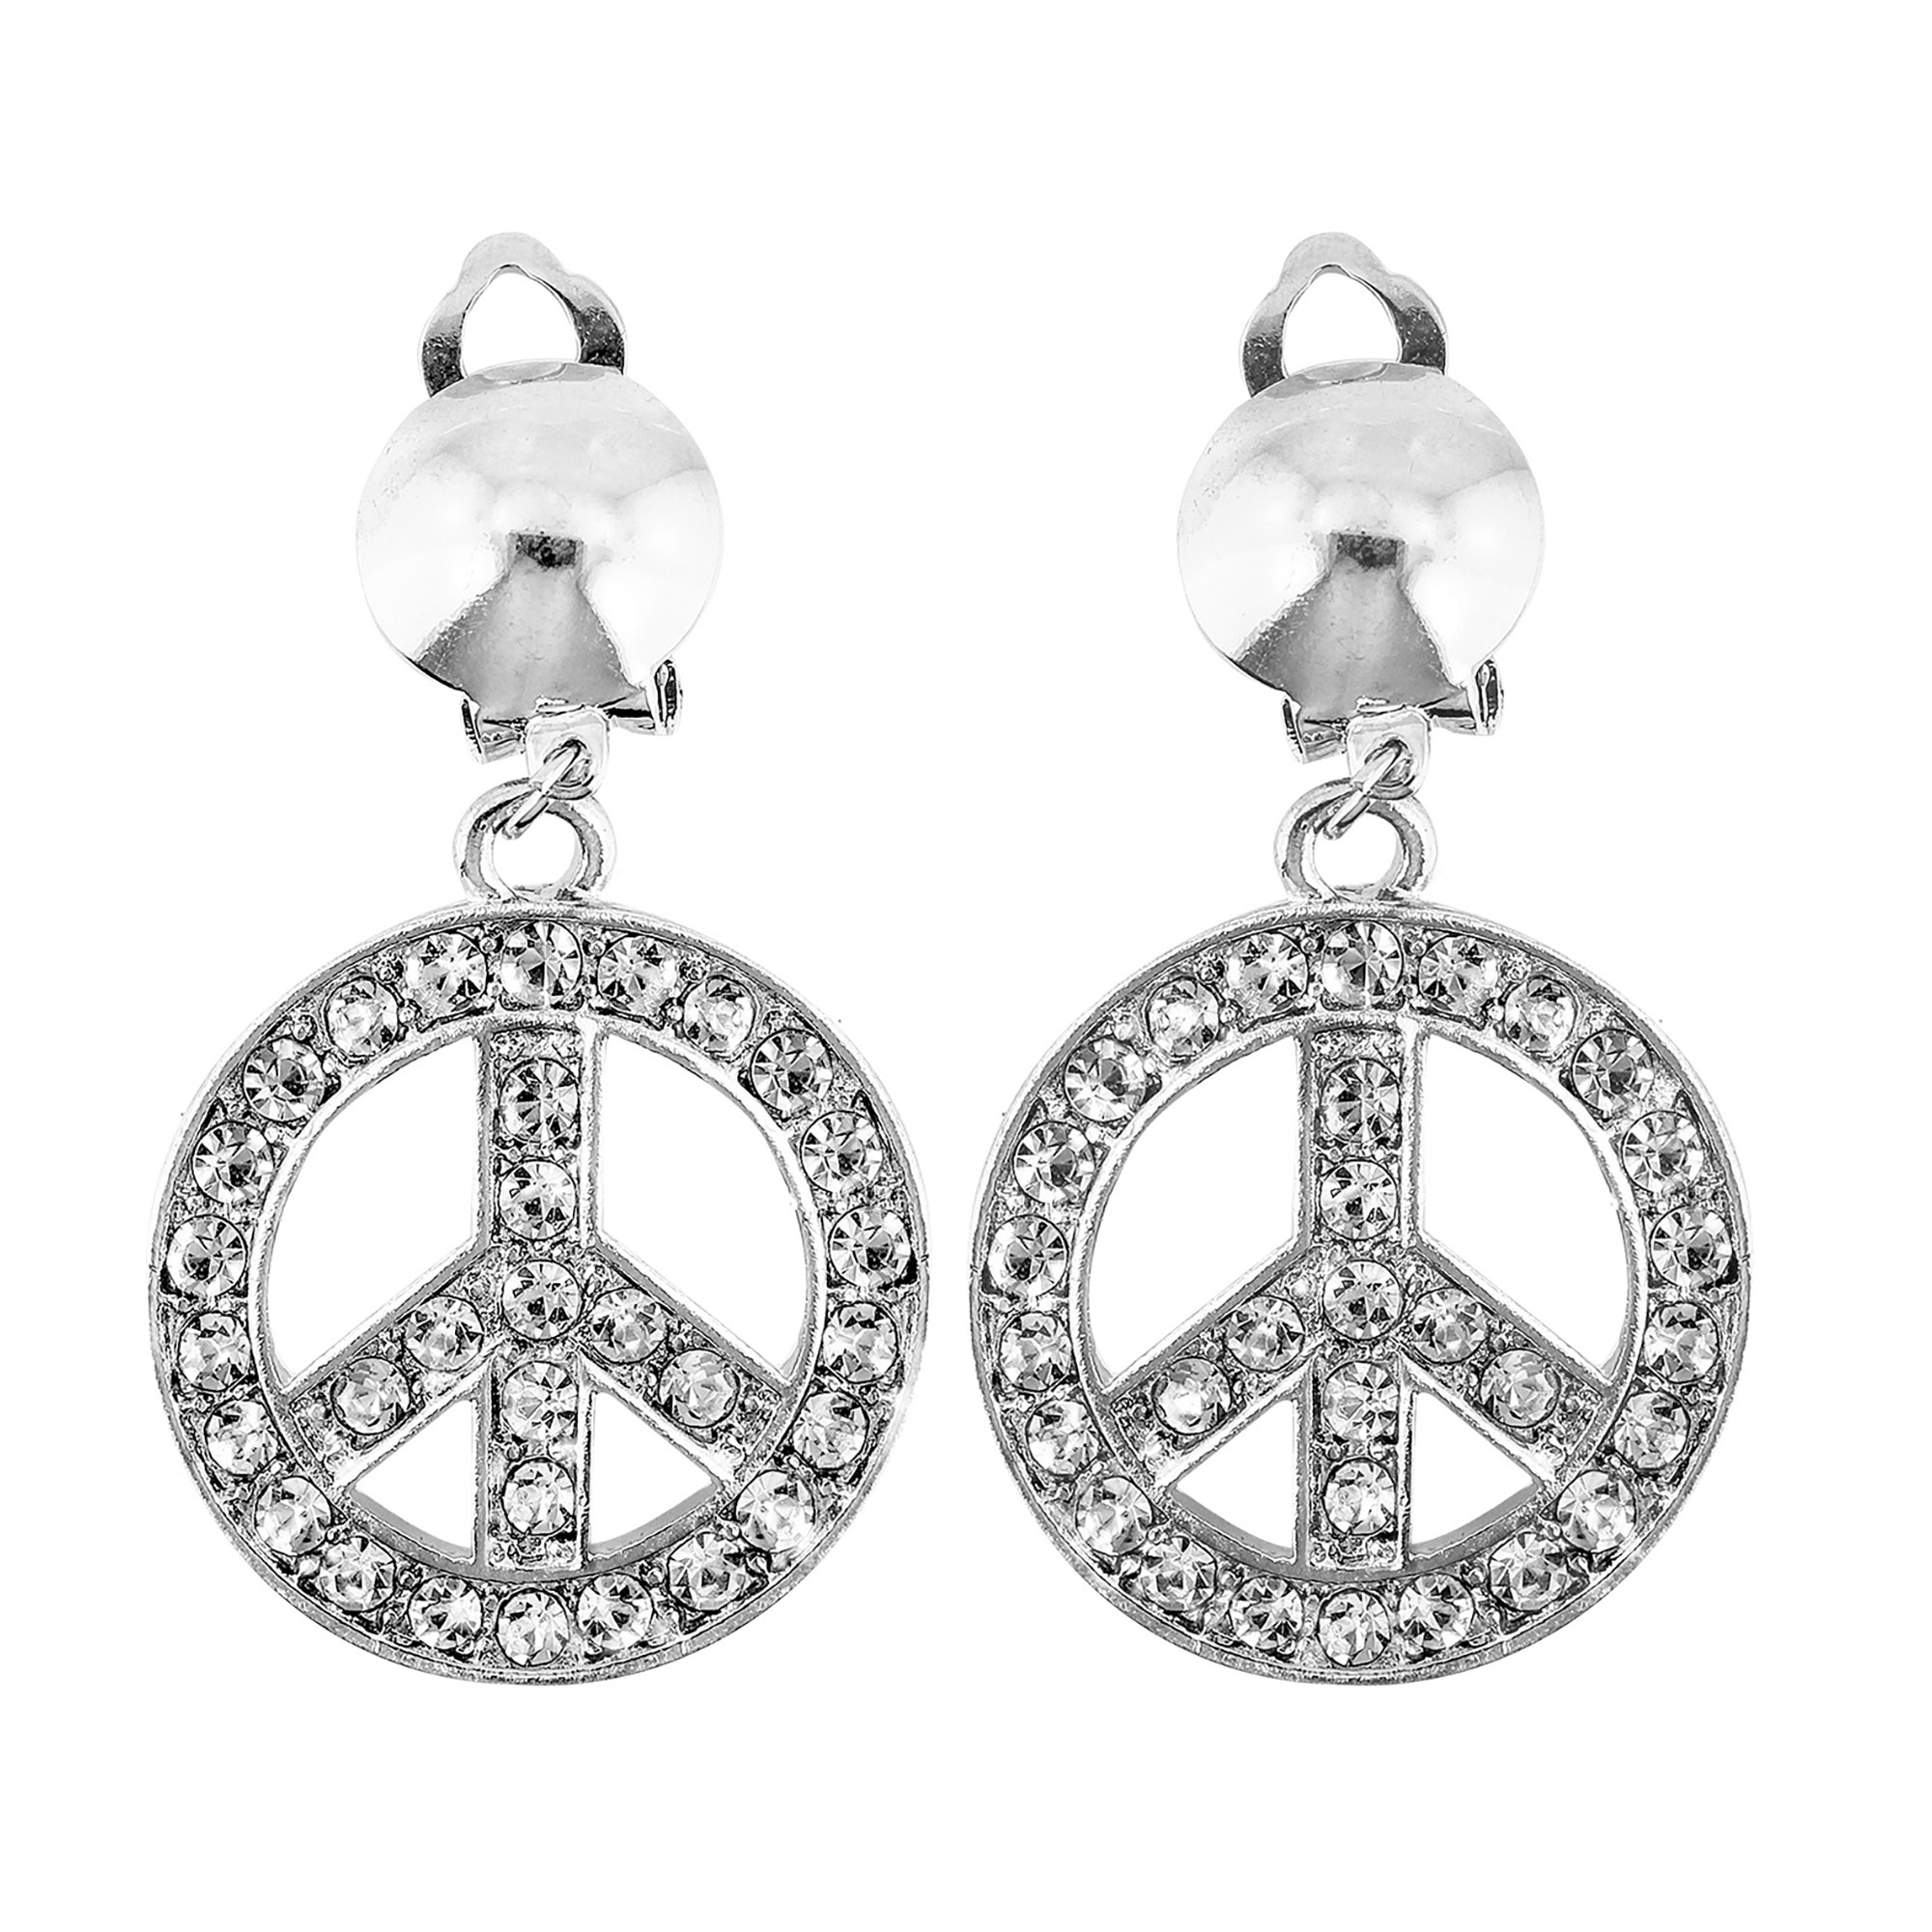 Peace and love oorbelllen strass